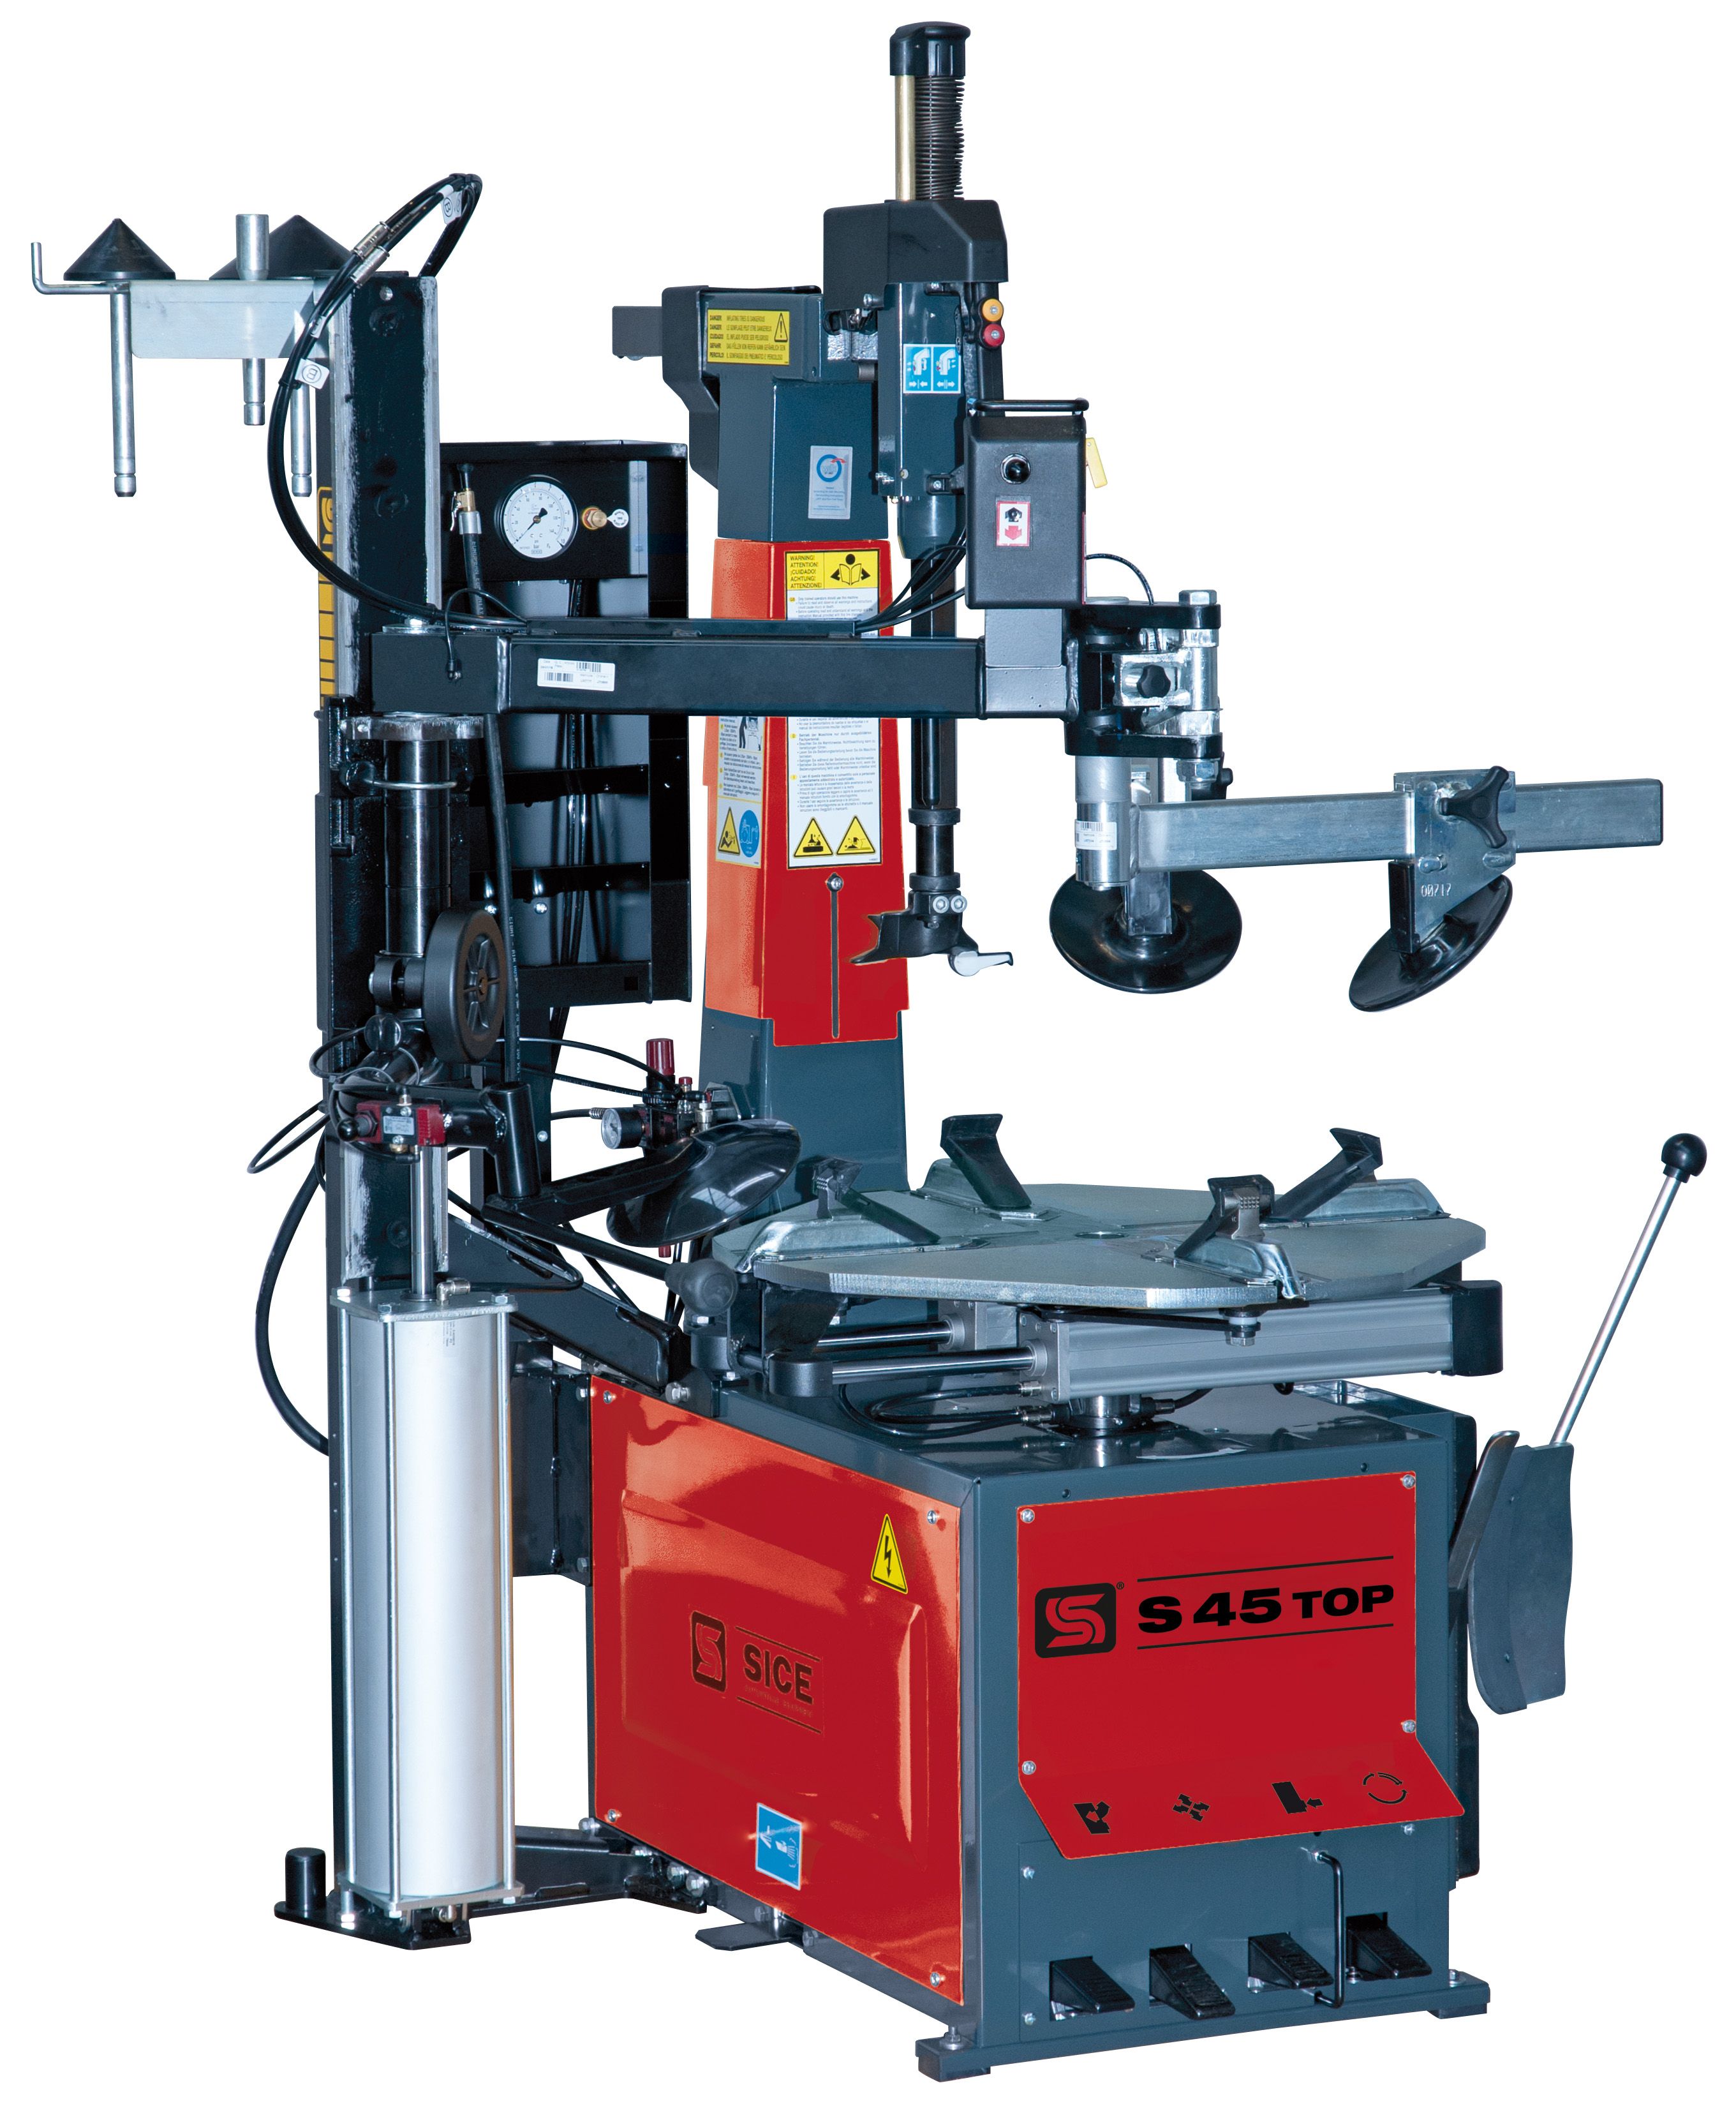 S45Top Car Tyre Changer 1ph With Assist Arm}